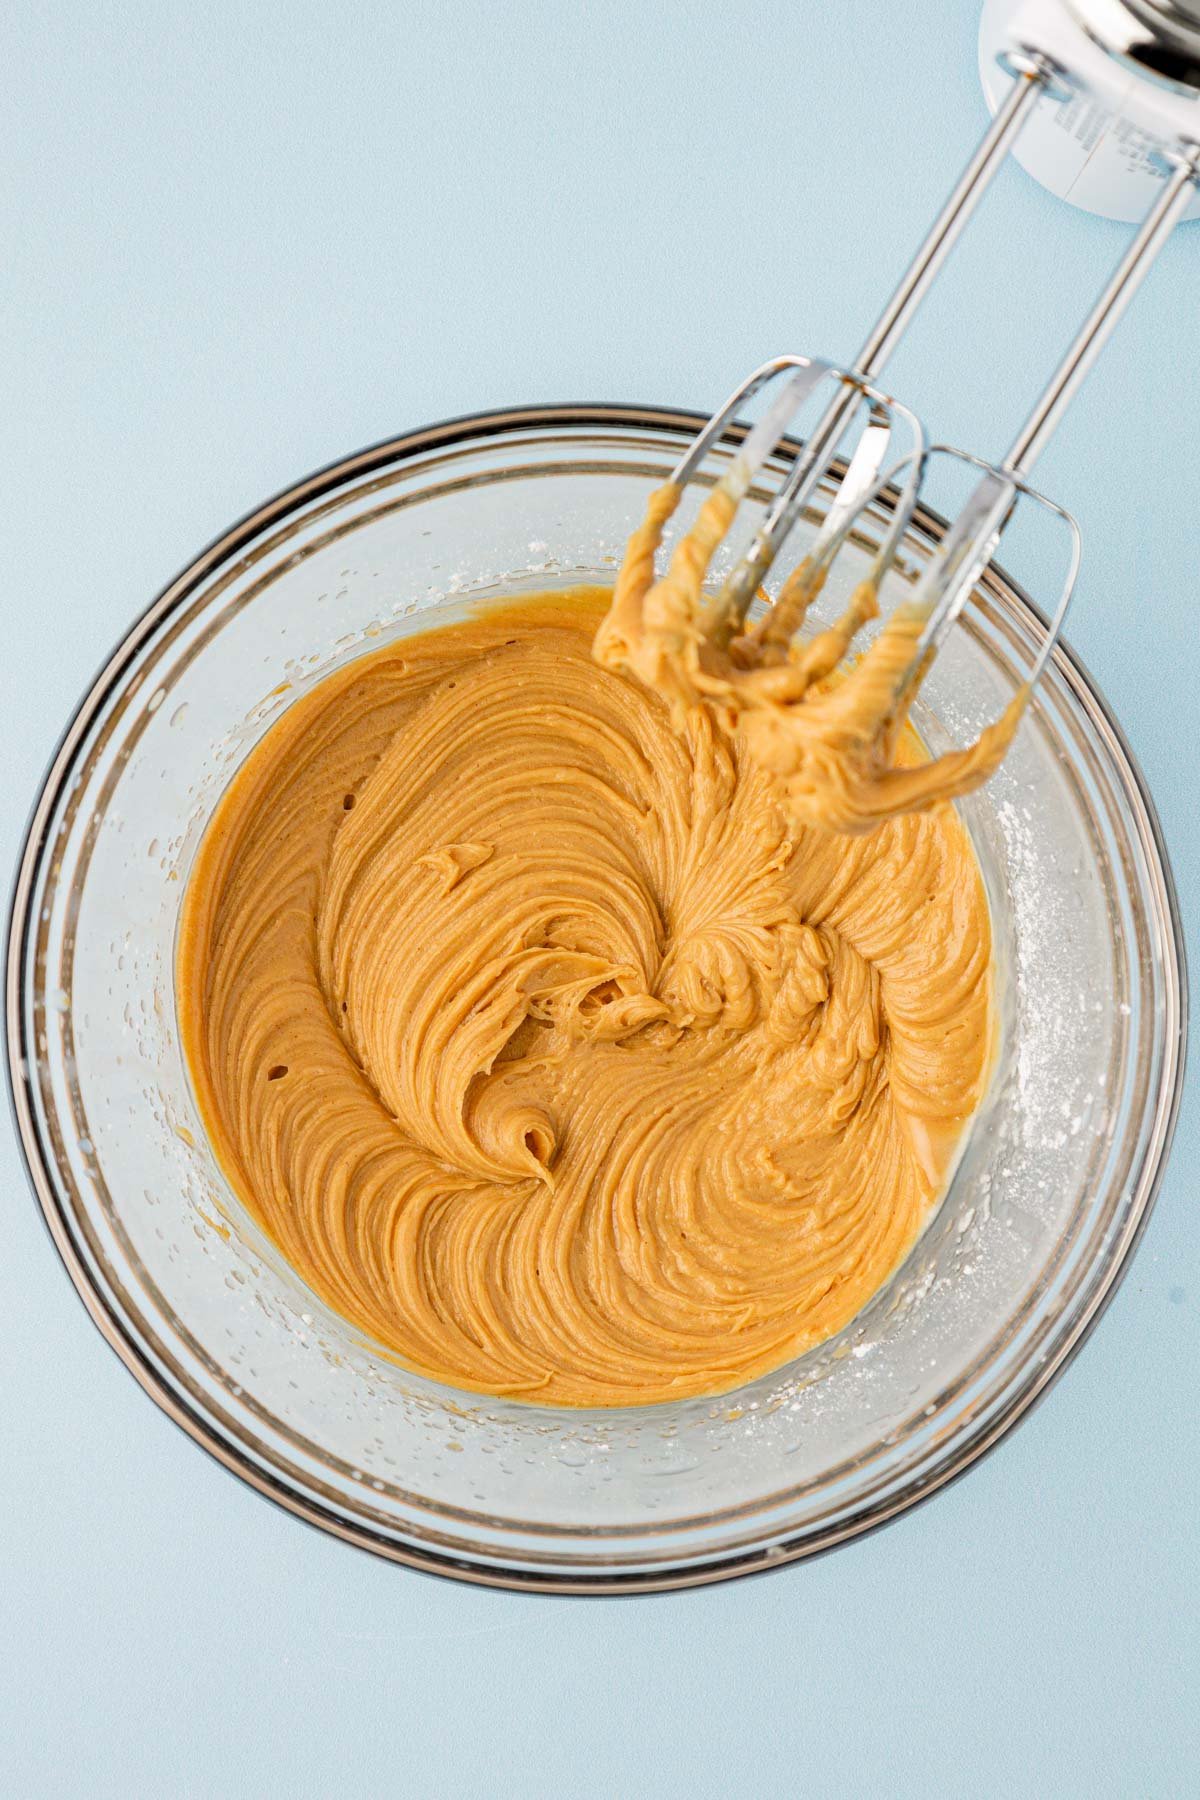 Butter, peanut butter, and other ingredients creamed together in a glass bowl.